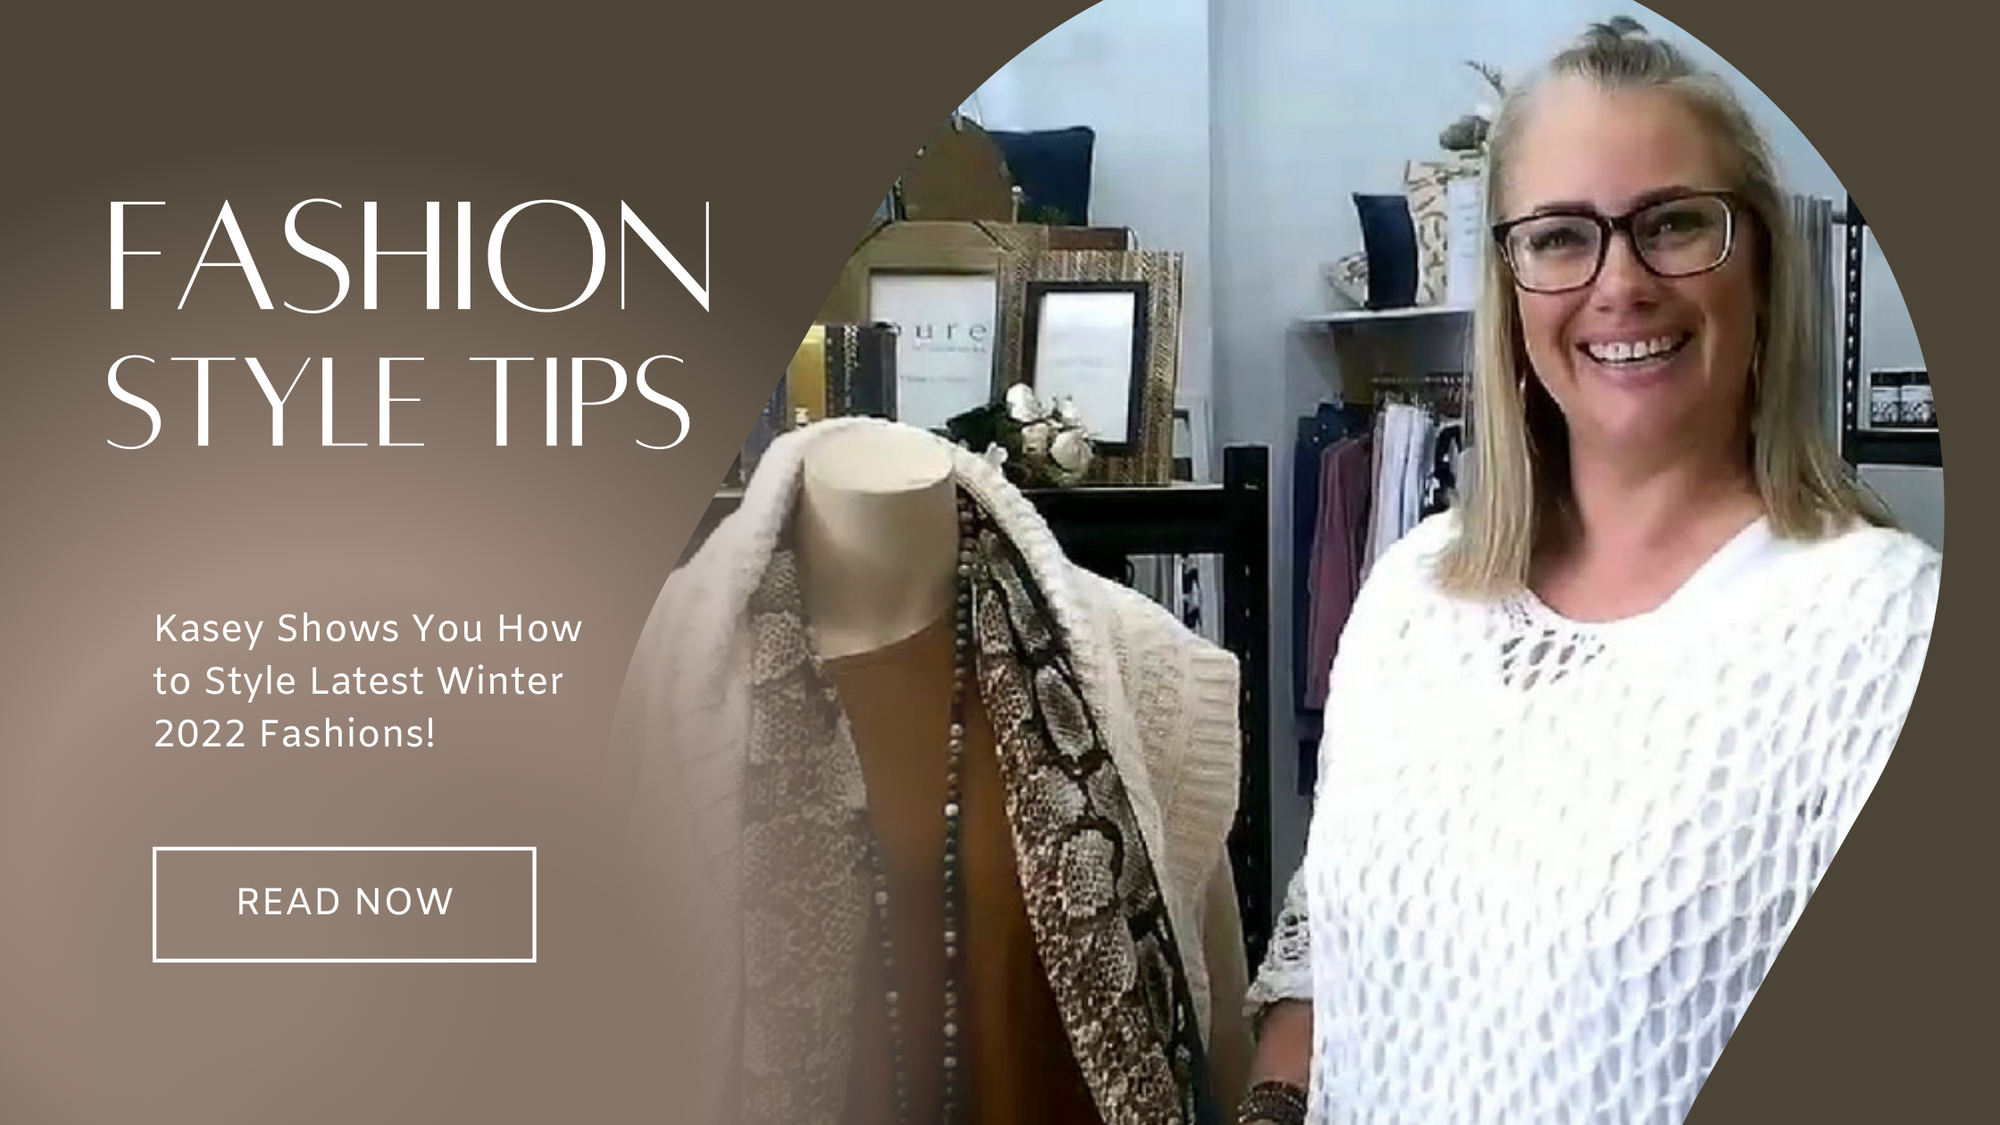 Fashion Styling Tips with Kasey